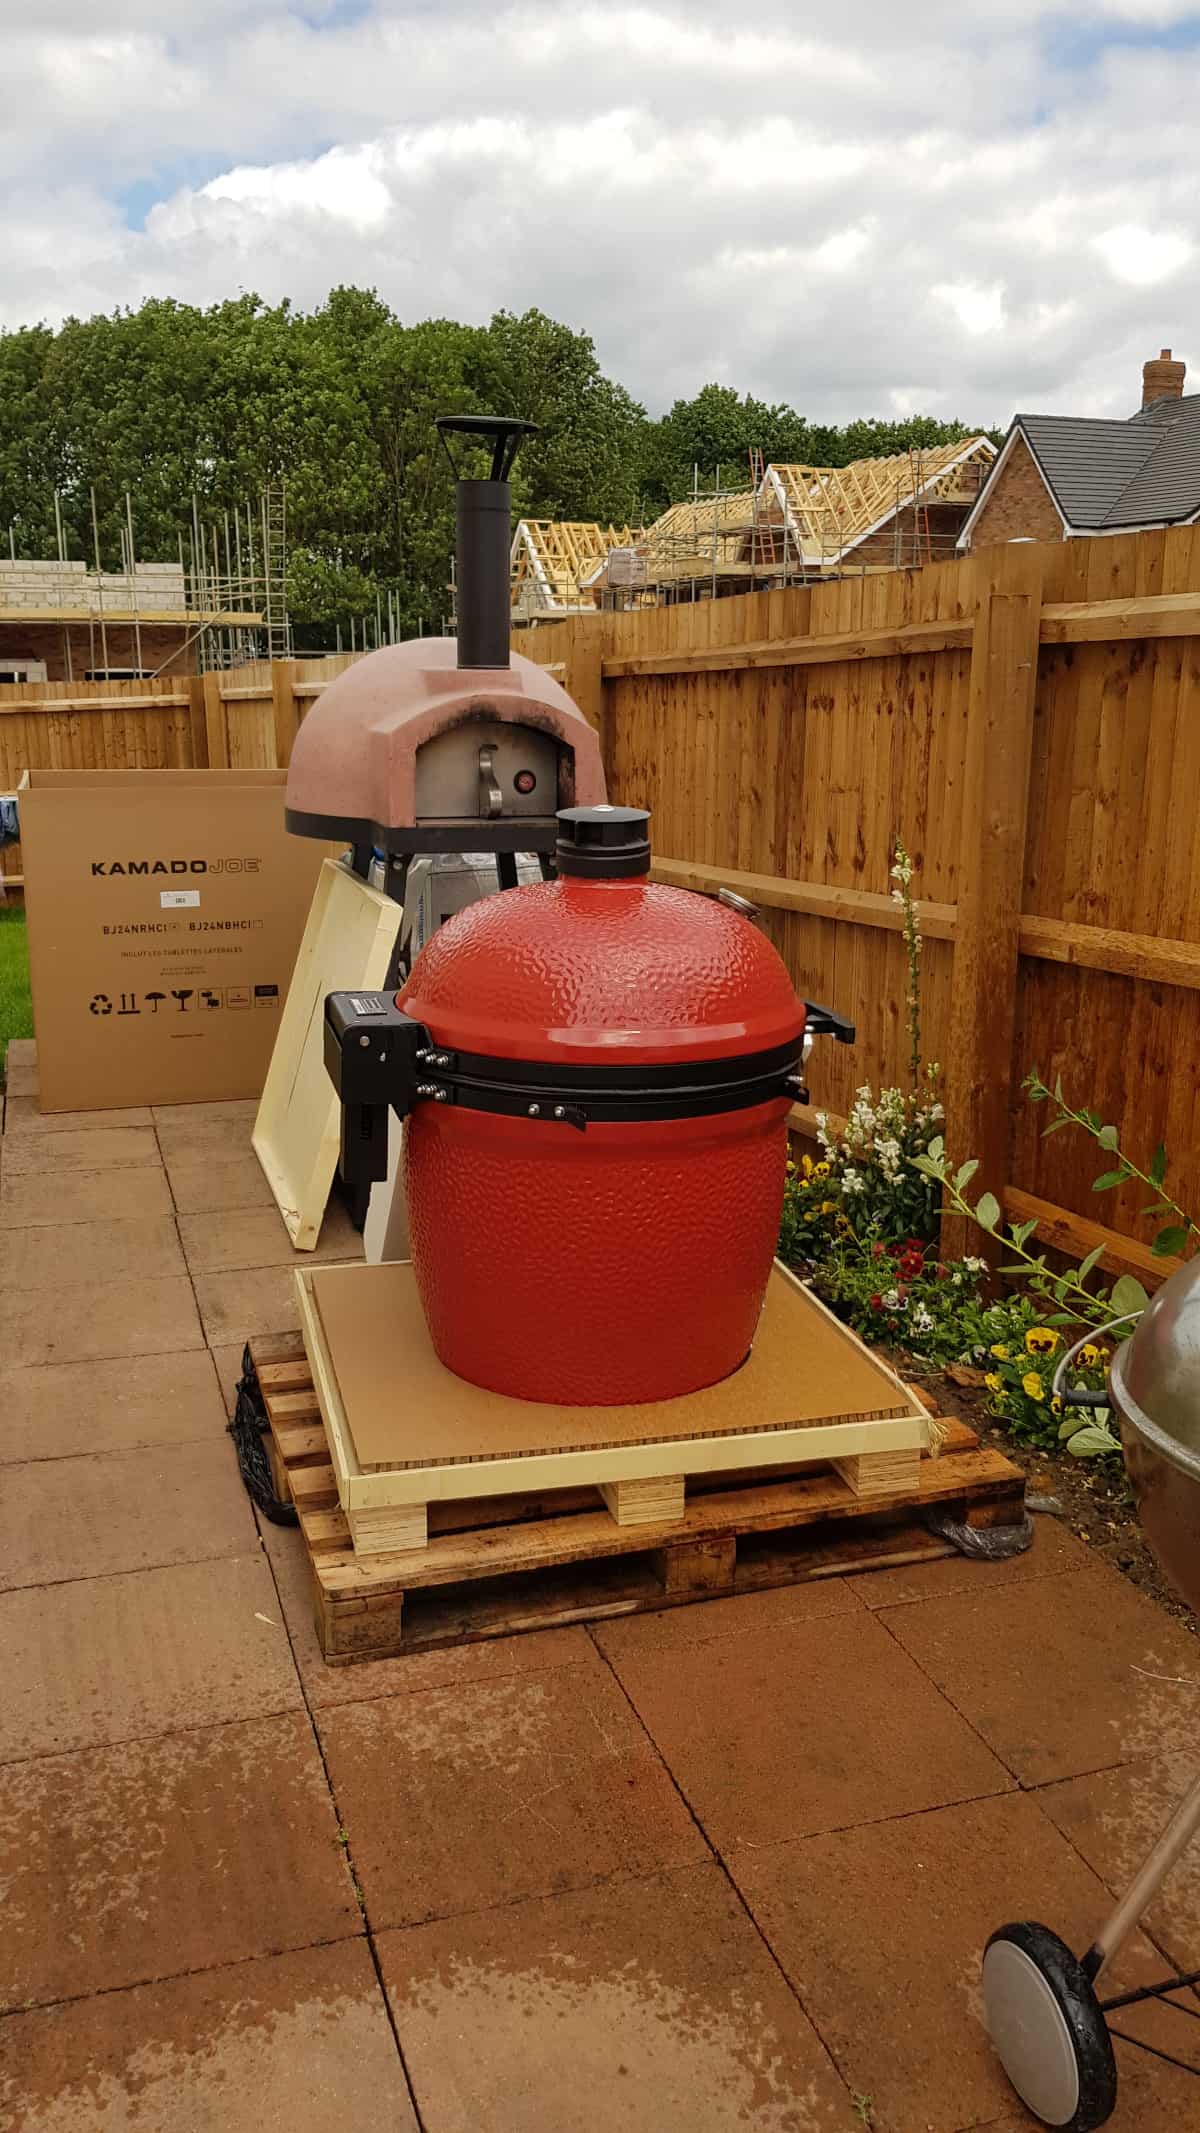 kamado joe big joe 3 larger pallet unboxed to reveal the grill body and lid